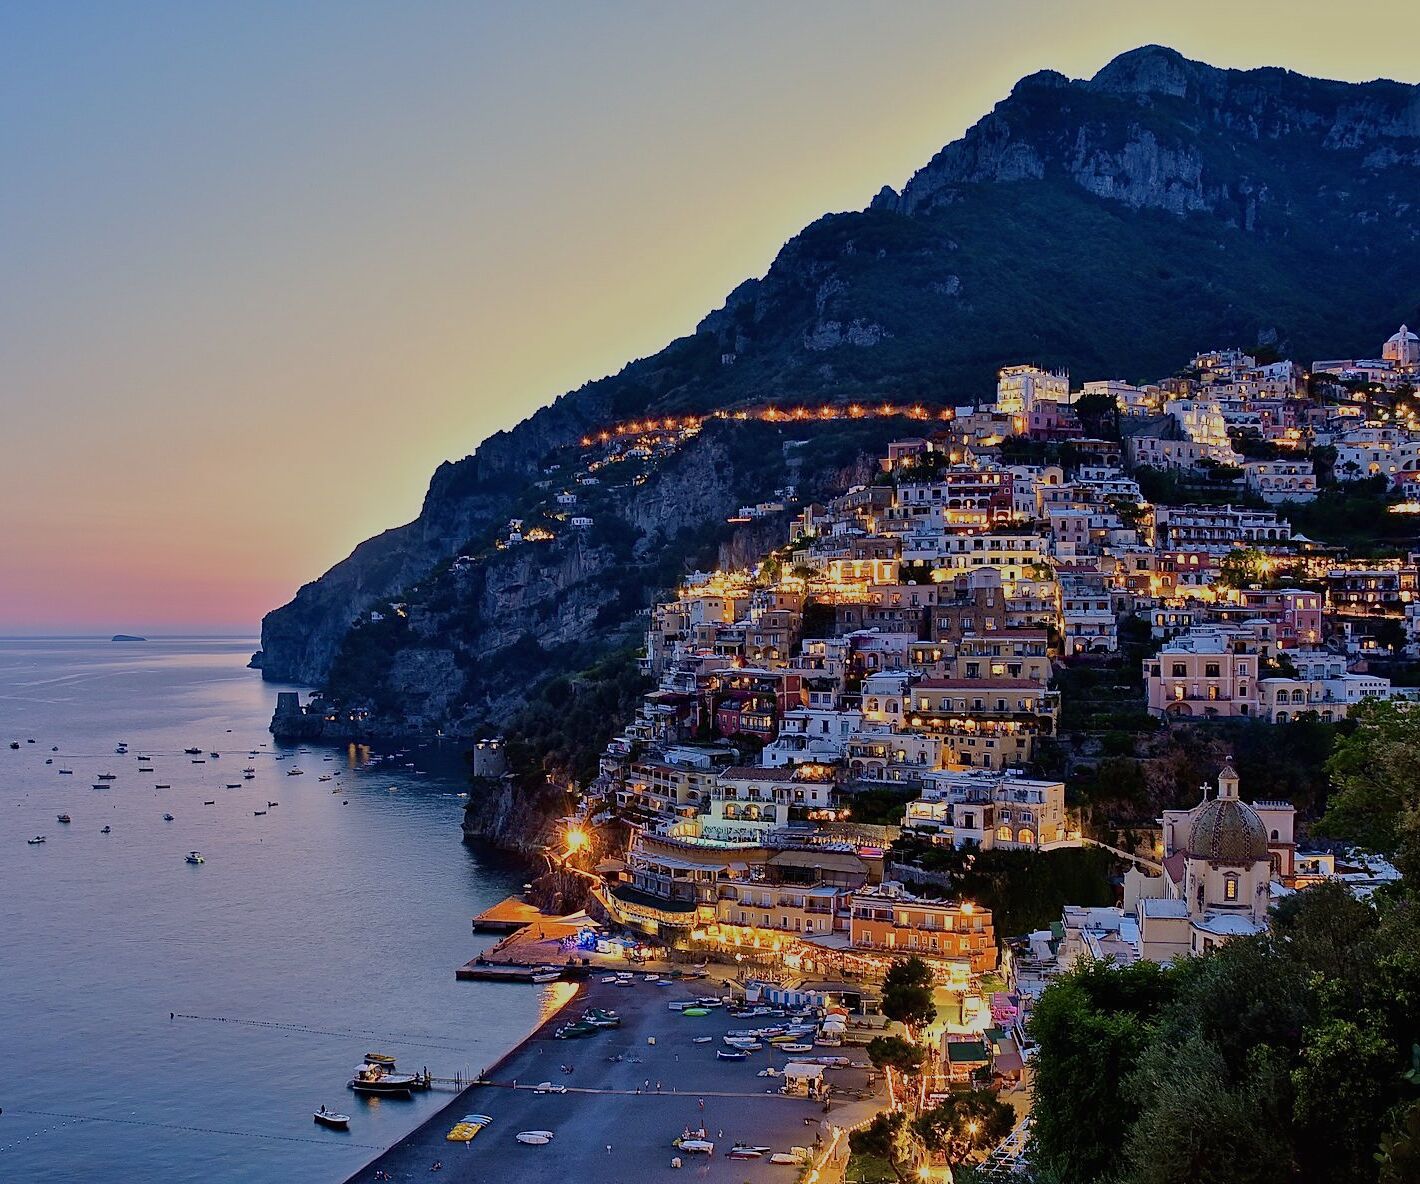 Sunset Group Tour - Positano Boat Rentals - Boat trips and tours in ...